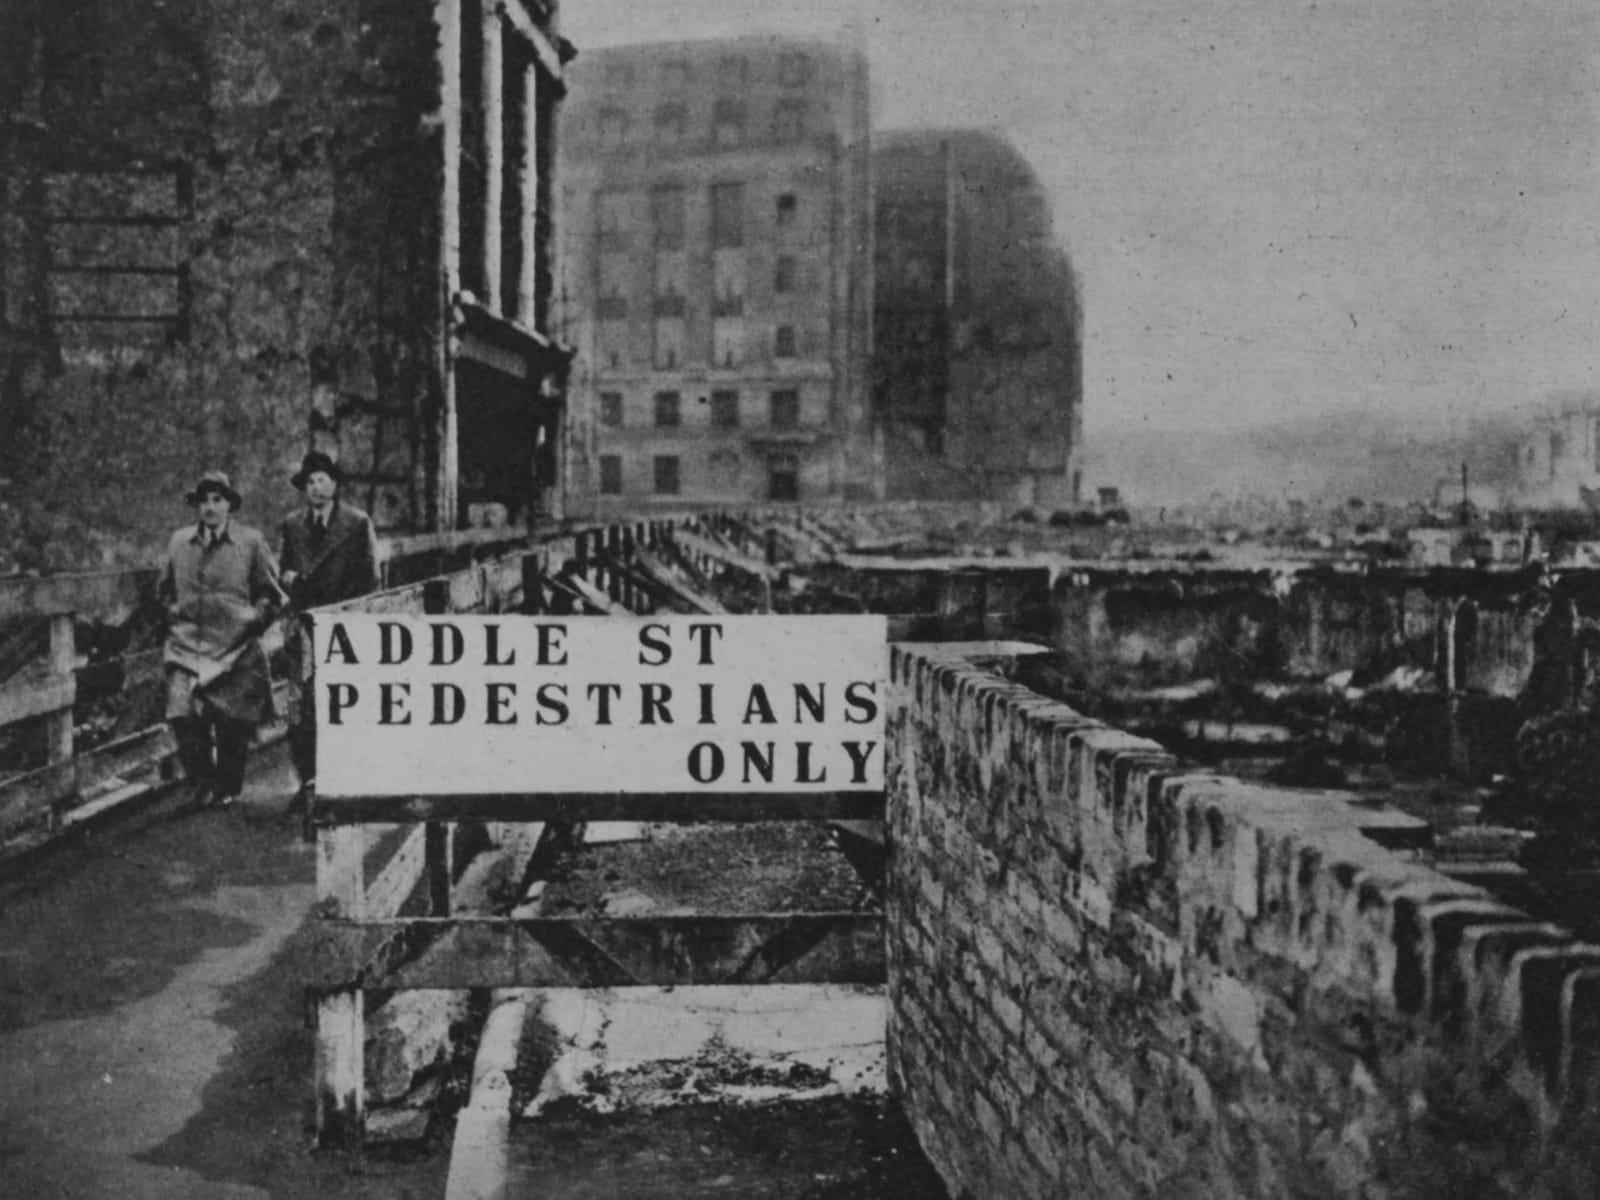 A stencilled sign that reads "Addle St, Pedestrians Only" in front of destroyed and damaged buildings to the right and ahead. There are two men coming towards the camera on the walkway adjacent to the sign.